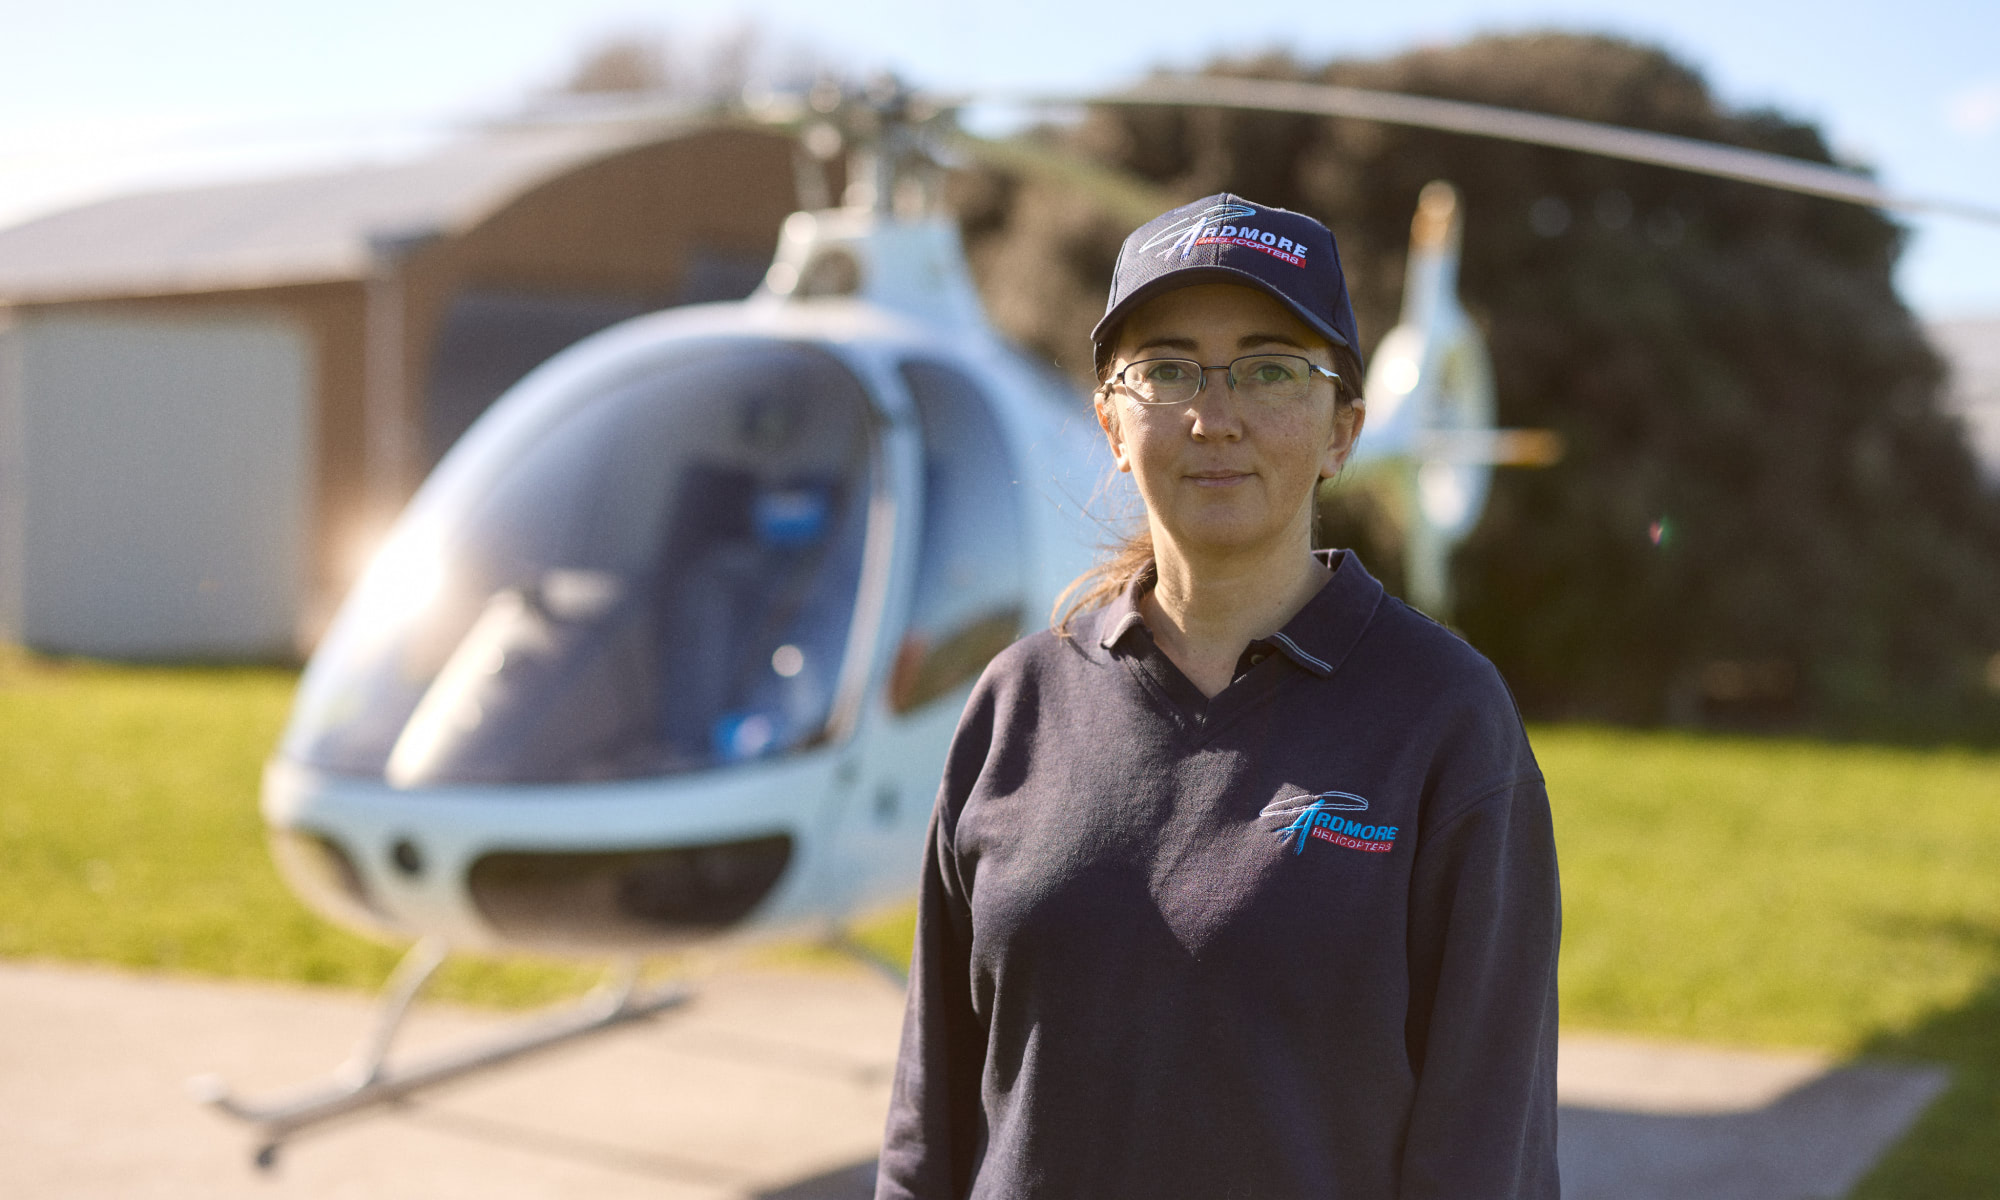 Woman standing in front of helicopter, wearing Ardmore Helicopters uniform